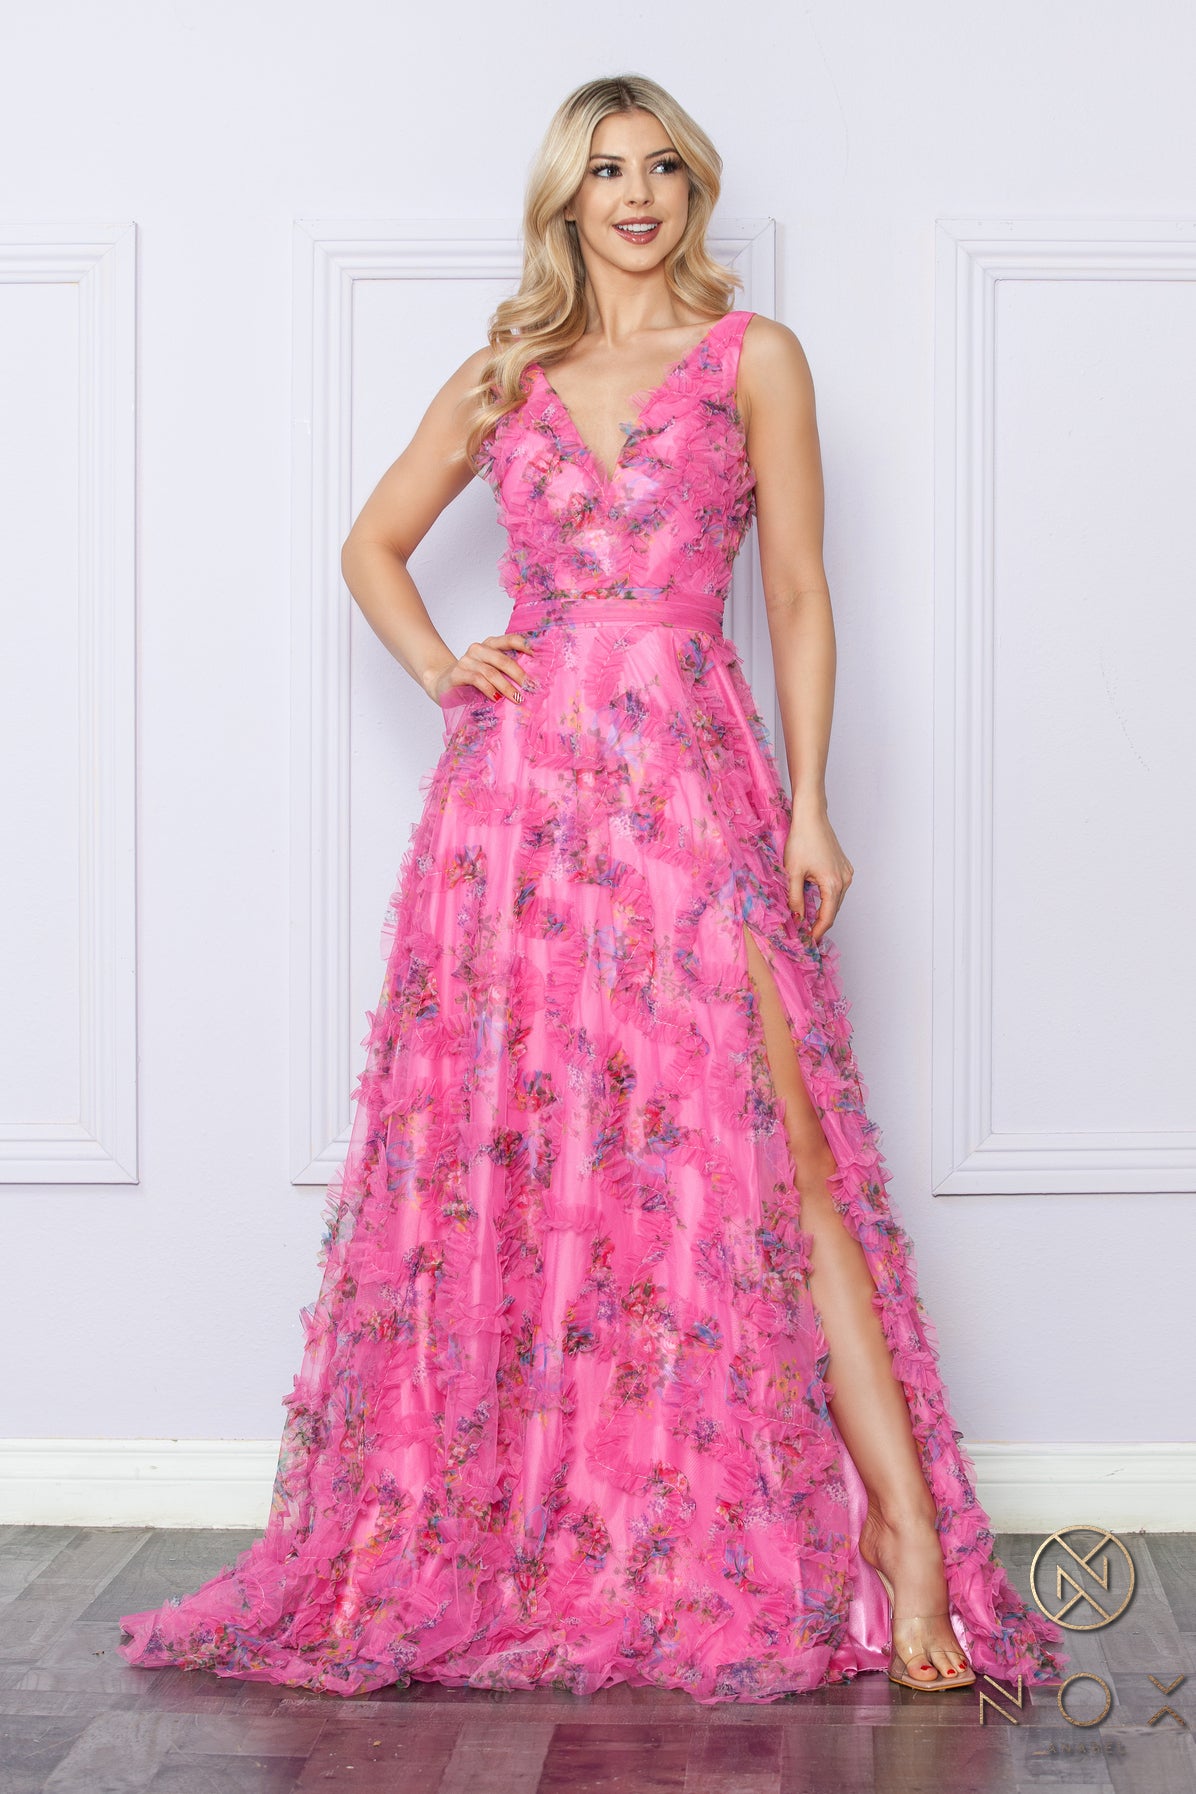 Elevate your formal ensemble with our Nox Anabel E1445 long floral A line dress. Featuring a stunning ruffle detailing and a flattering V neck, this dress is perfect for any prom or formal event. The elegant pleated design and maxi slit add a touch of boho flair to this timeless piece.  Sizes: 2-16  Colors: Blue, Fuchsia, Lilac